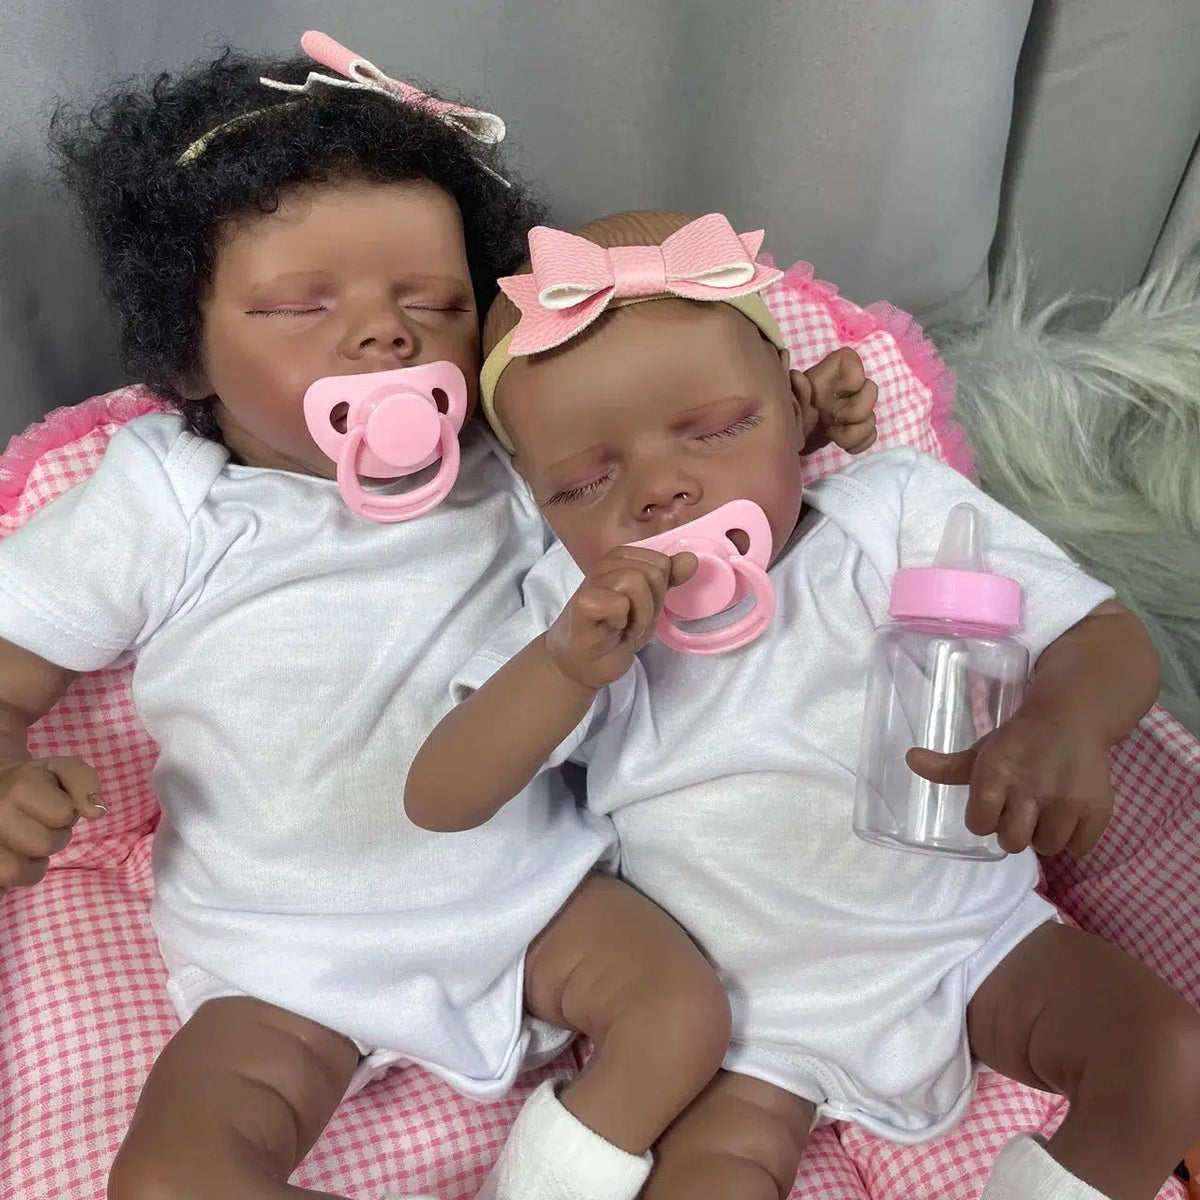 43CM Finished Reborn Baby Doll Twins African American Dark Skin Girl Premature Baby Collectible Art Doll Best Gift For Kids-Maternity Miracles - Mom & Baby Gifts